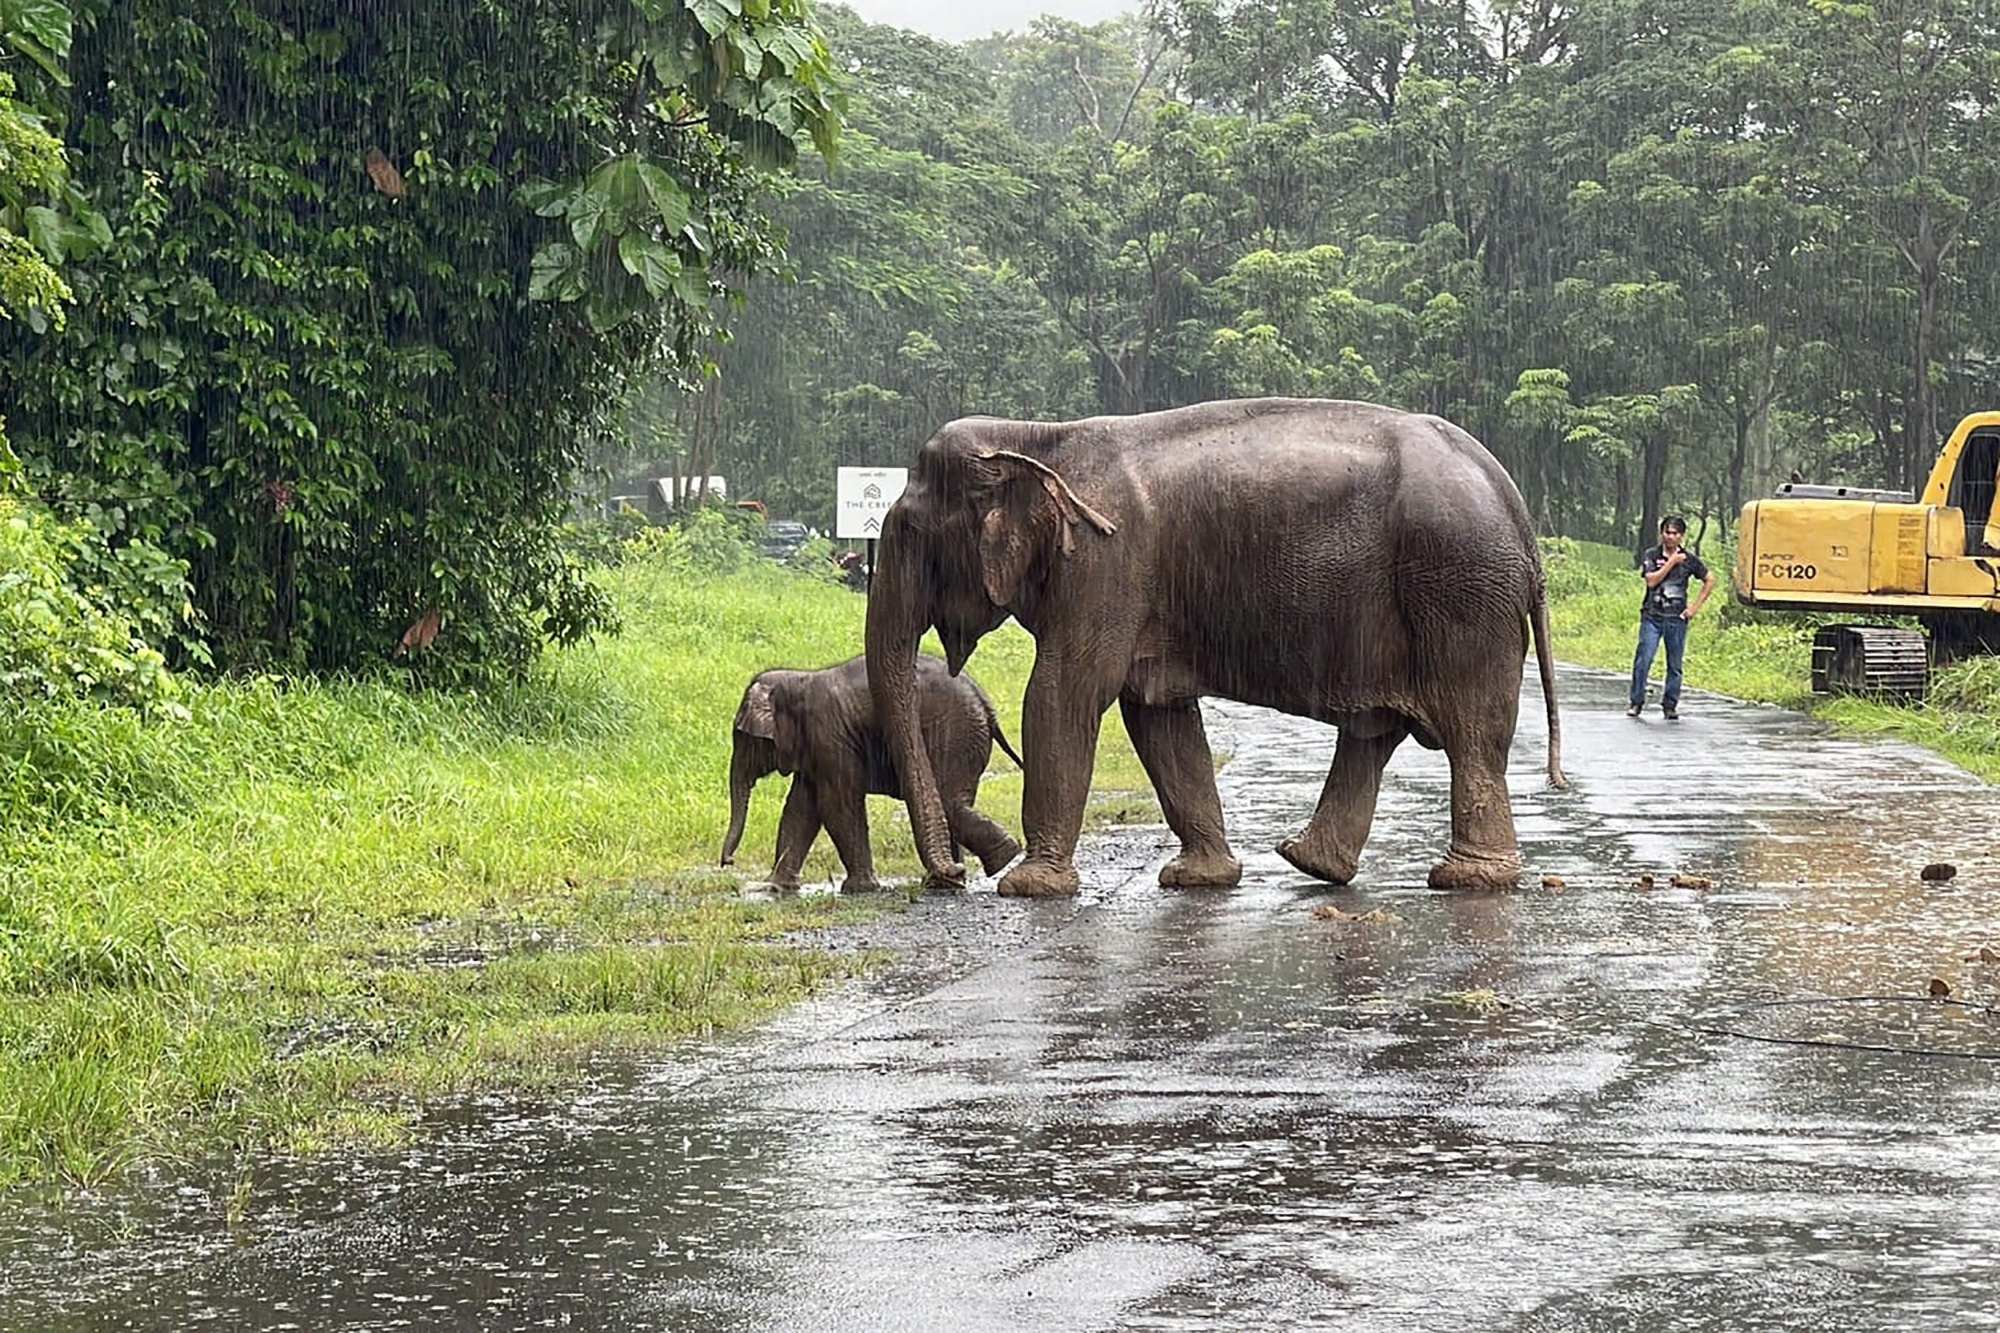 Asian elephants have been coming into increased contact with humans in southwestern China in recent years. Photo: AFP